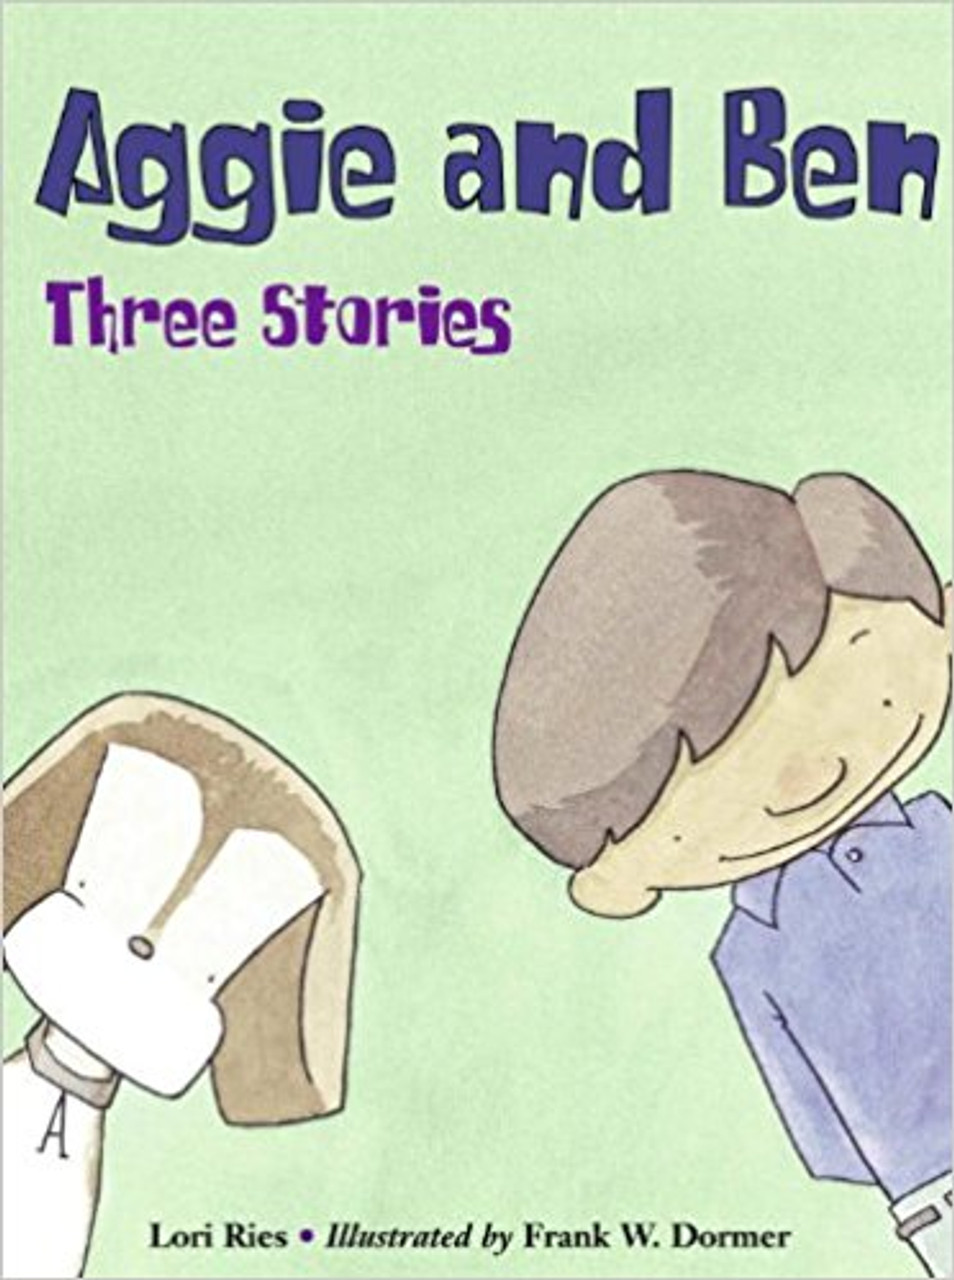 Three short chapters just right for beginning readers tell the story of Aggie's overnight stay at the vet to get spayed. Find out who needs more courage, Aggie or Ben, as this lovable duo deals with loneliness and healing. Full color.